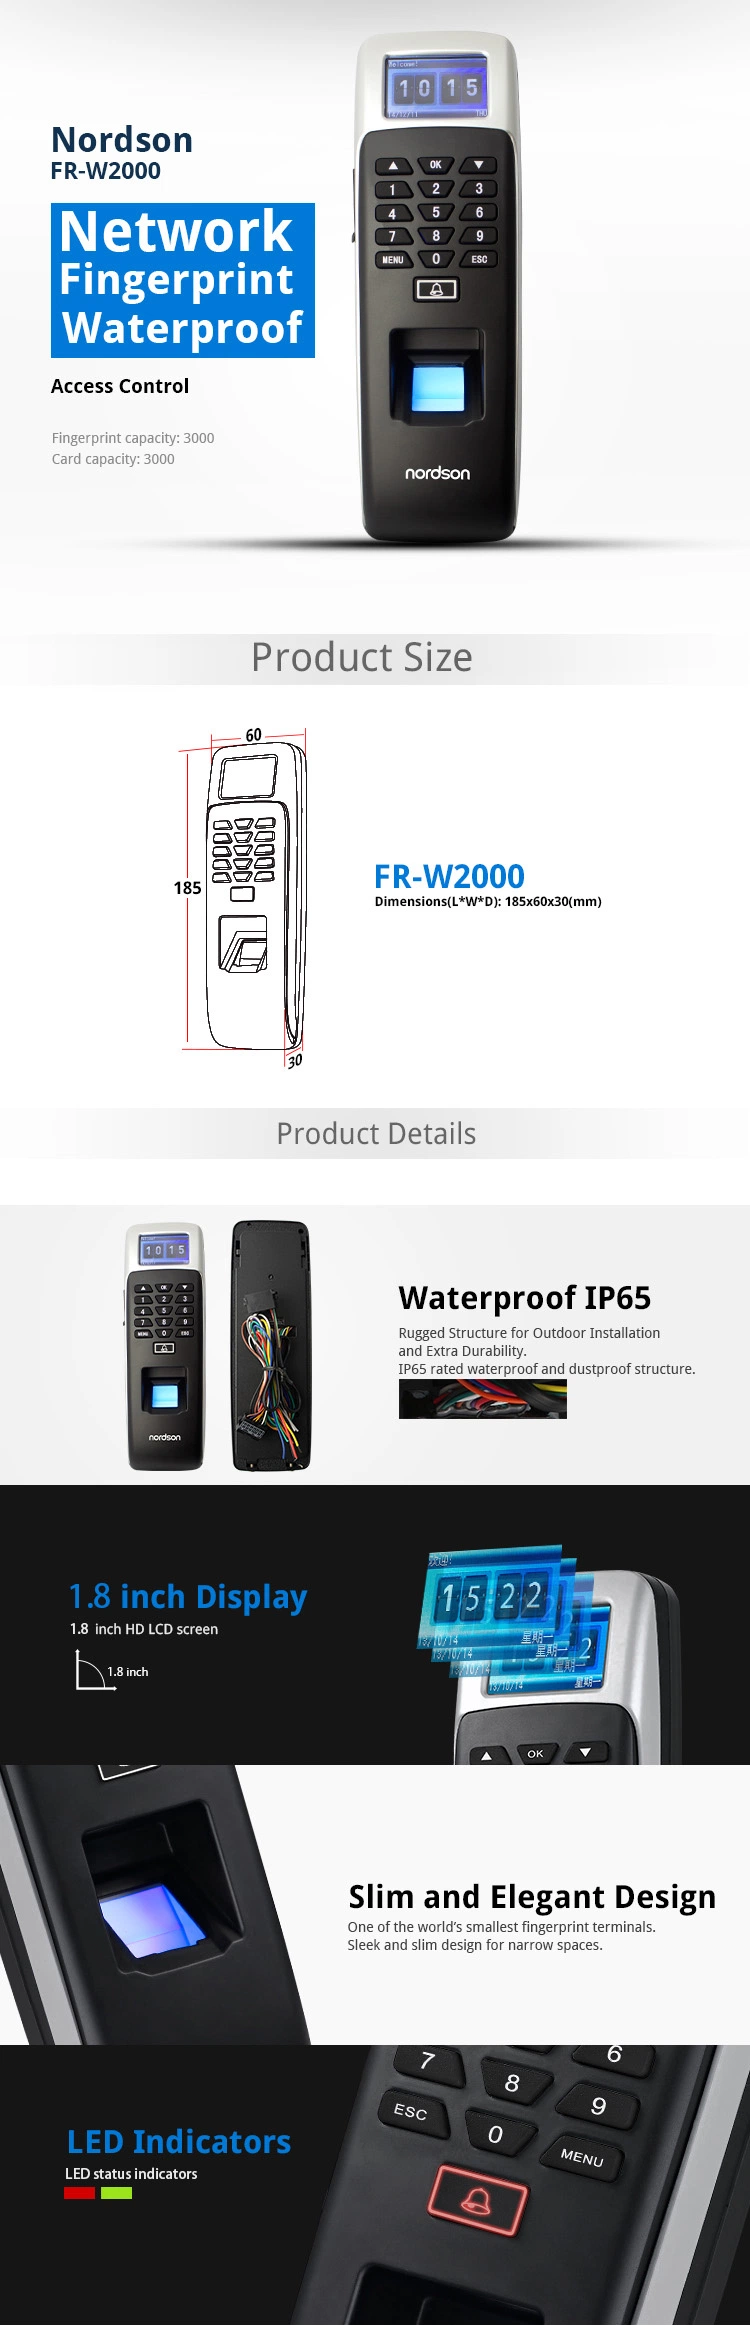 17 Languages Waterproof IP65 ID Card Biometric Network Fingerprint Device with Access Control